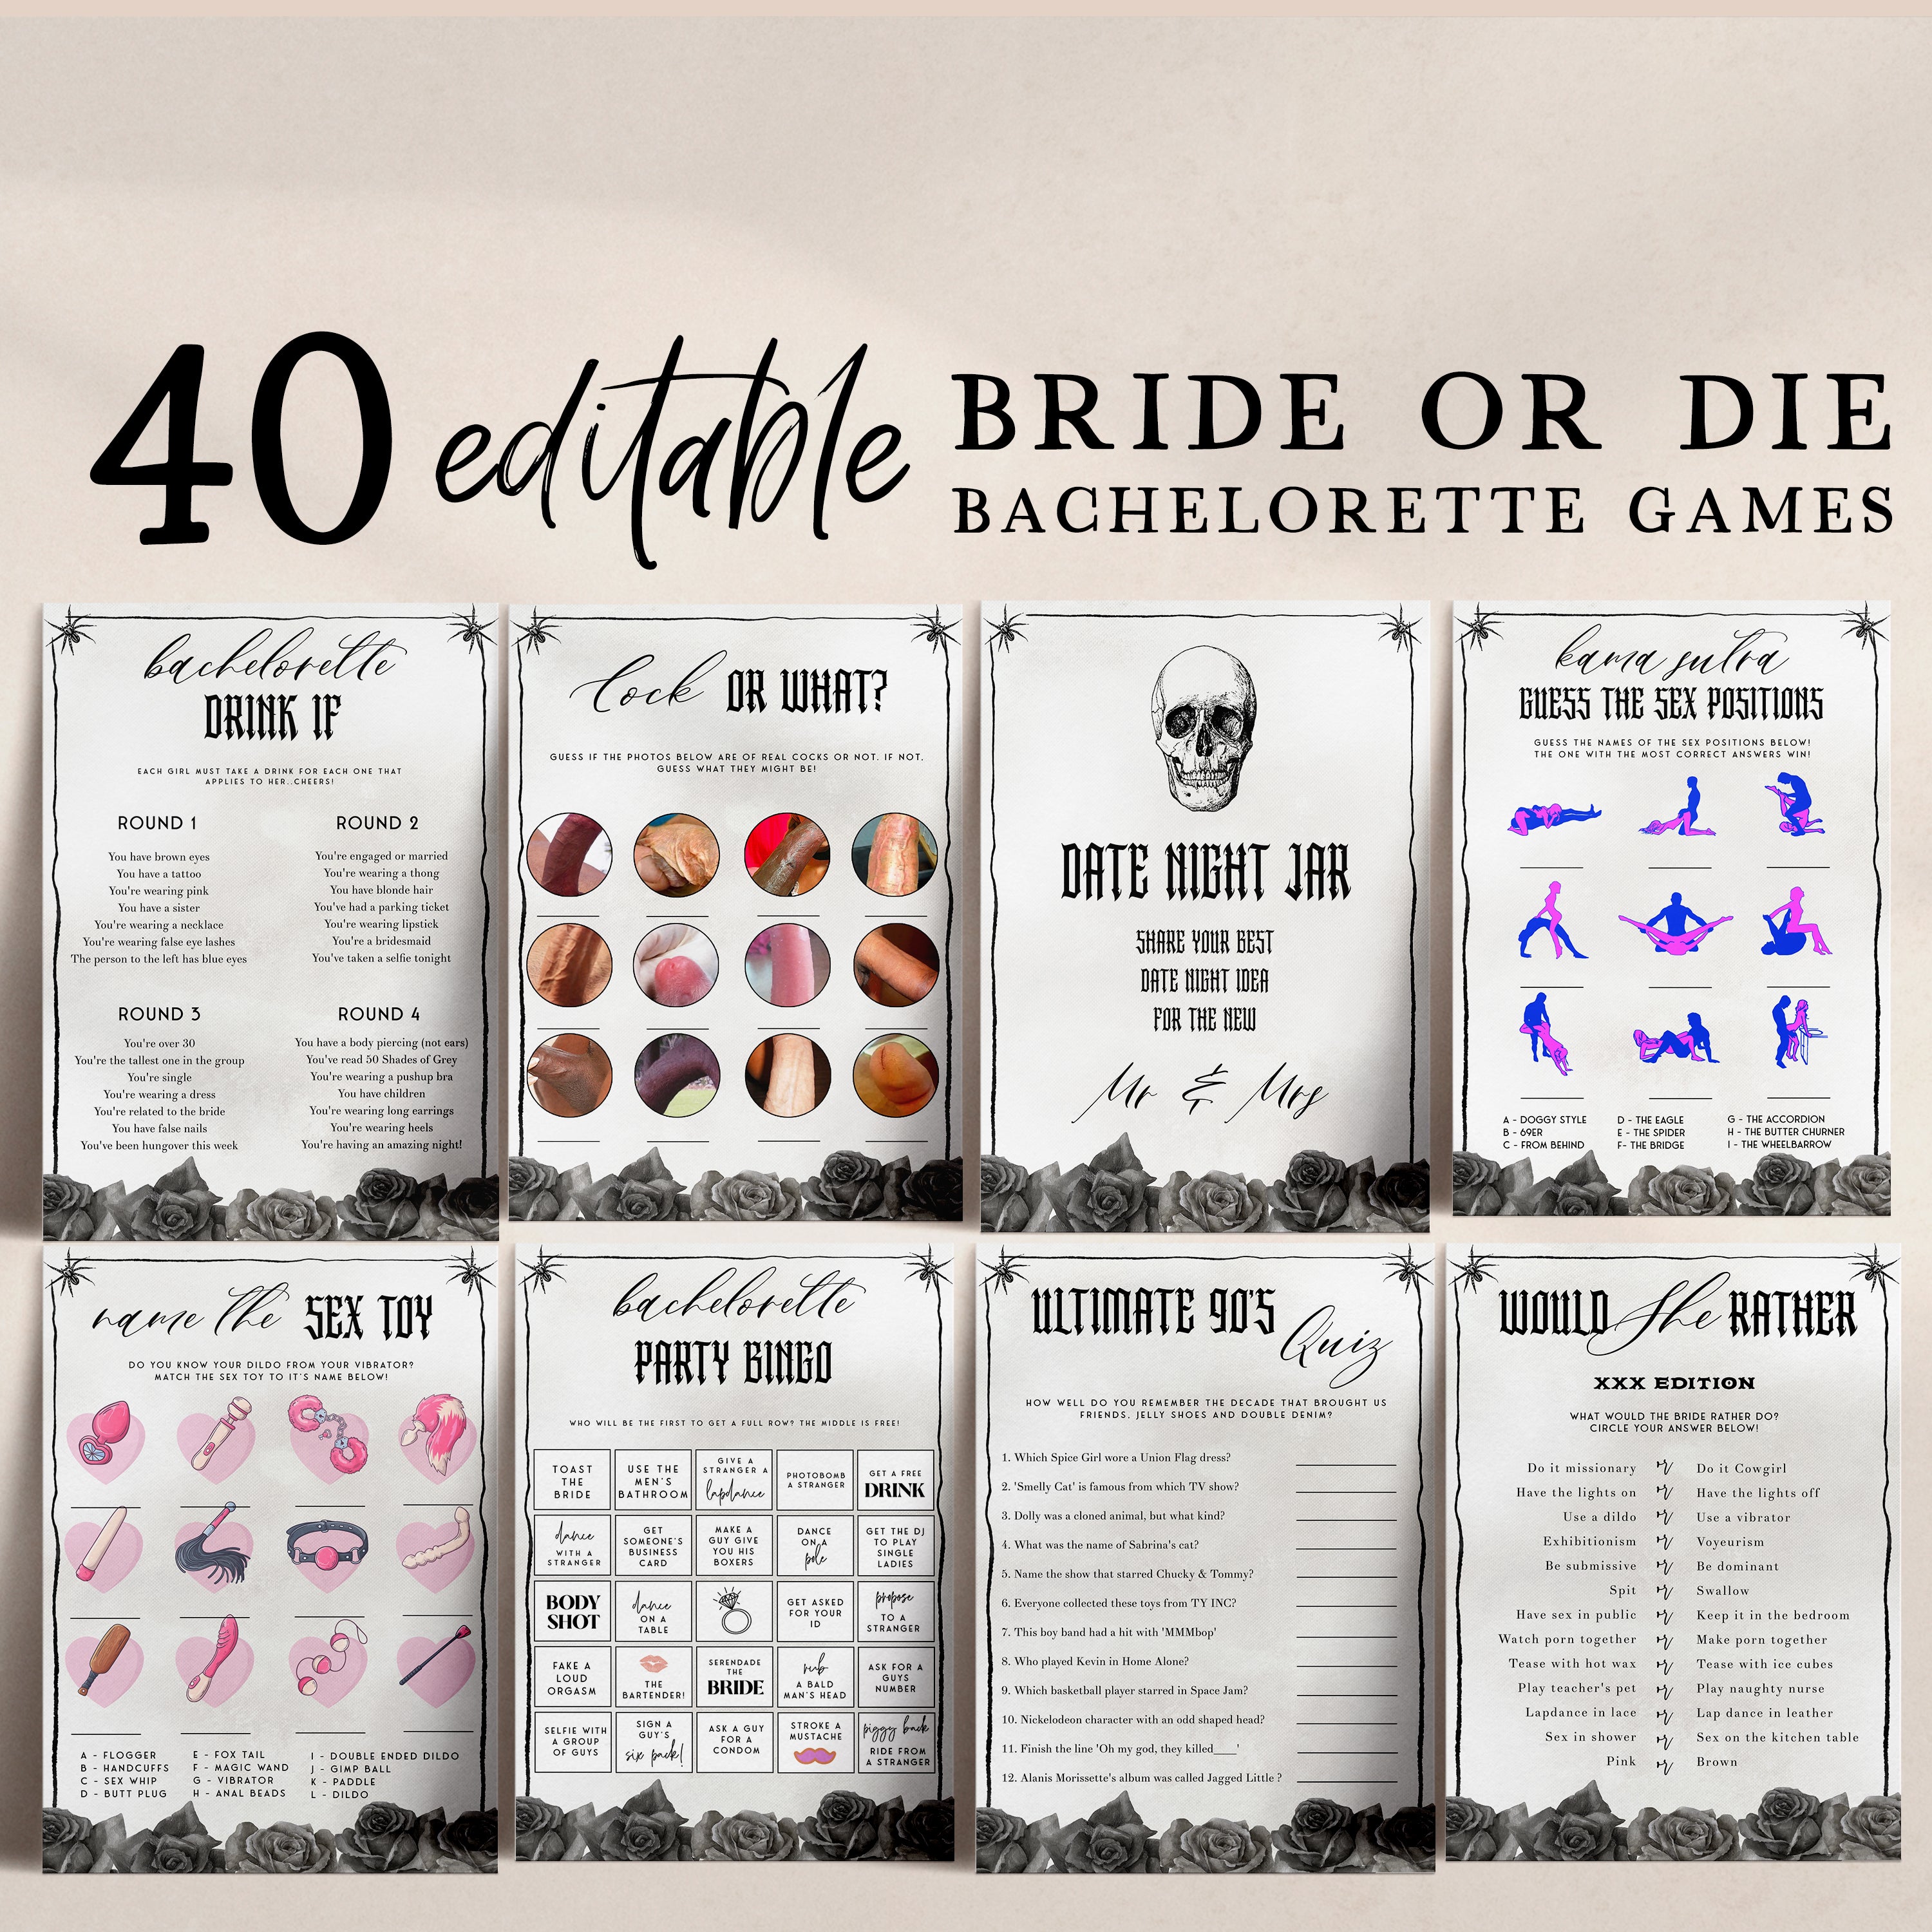 Fully editable and printable 40 bachelorette bride or die games with a gothic design. Perfect for a Bride or Die bachelorette themed party